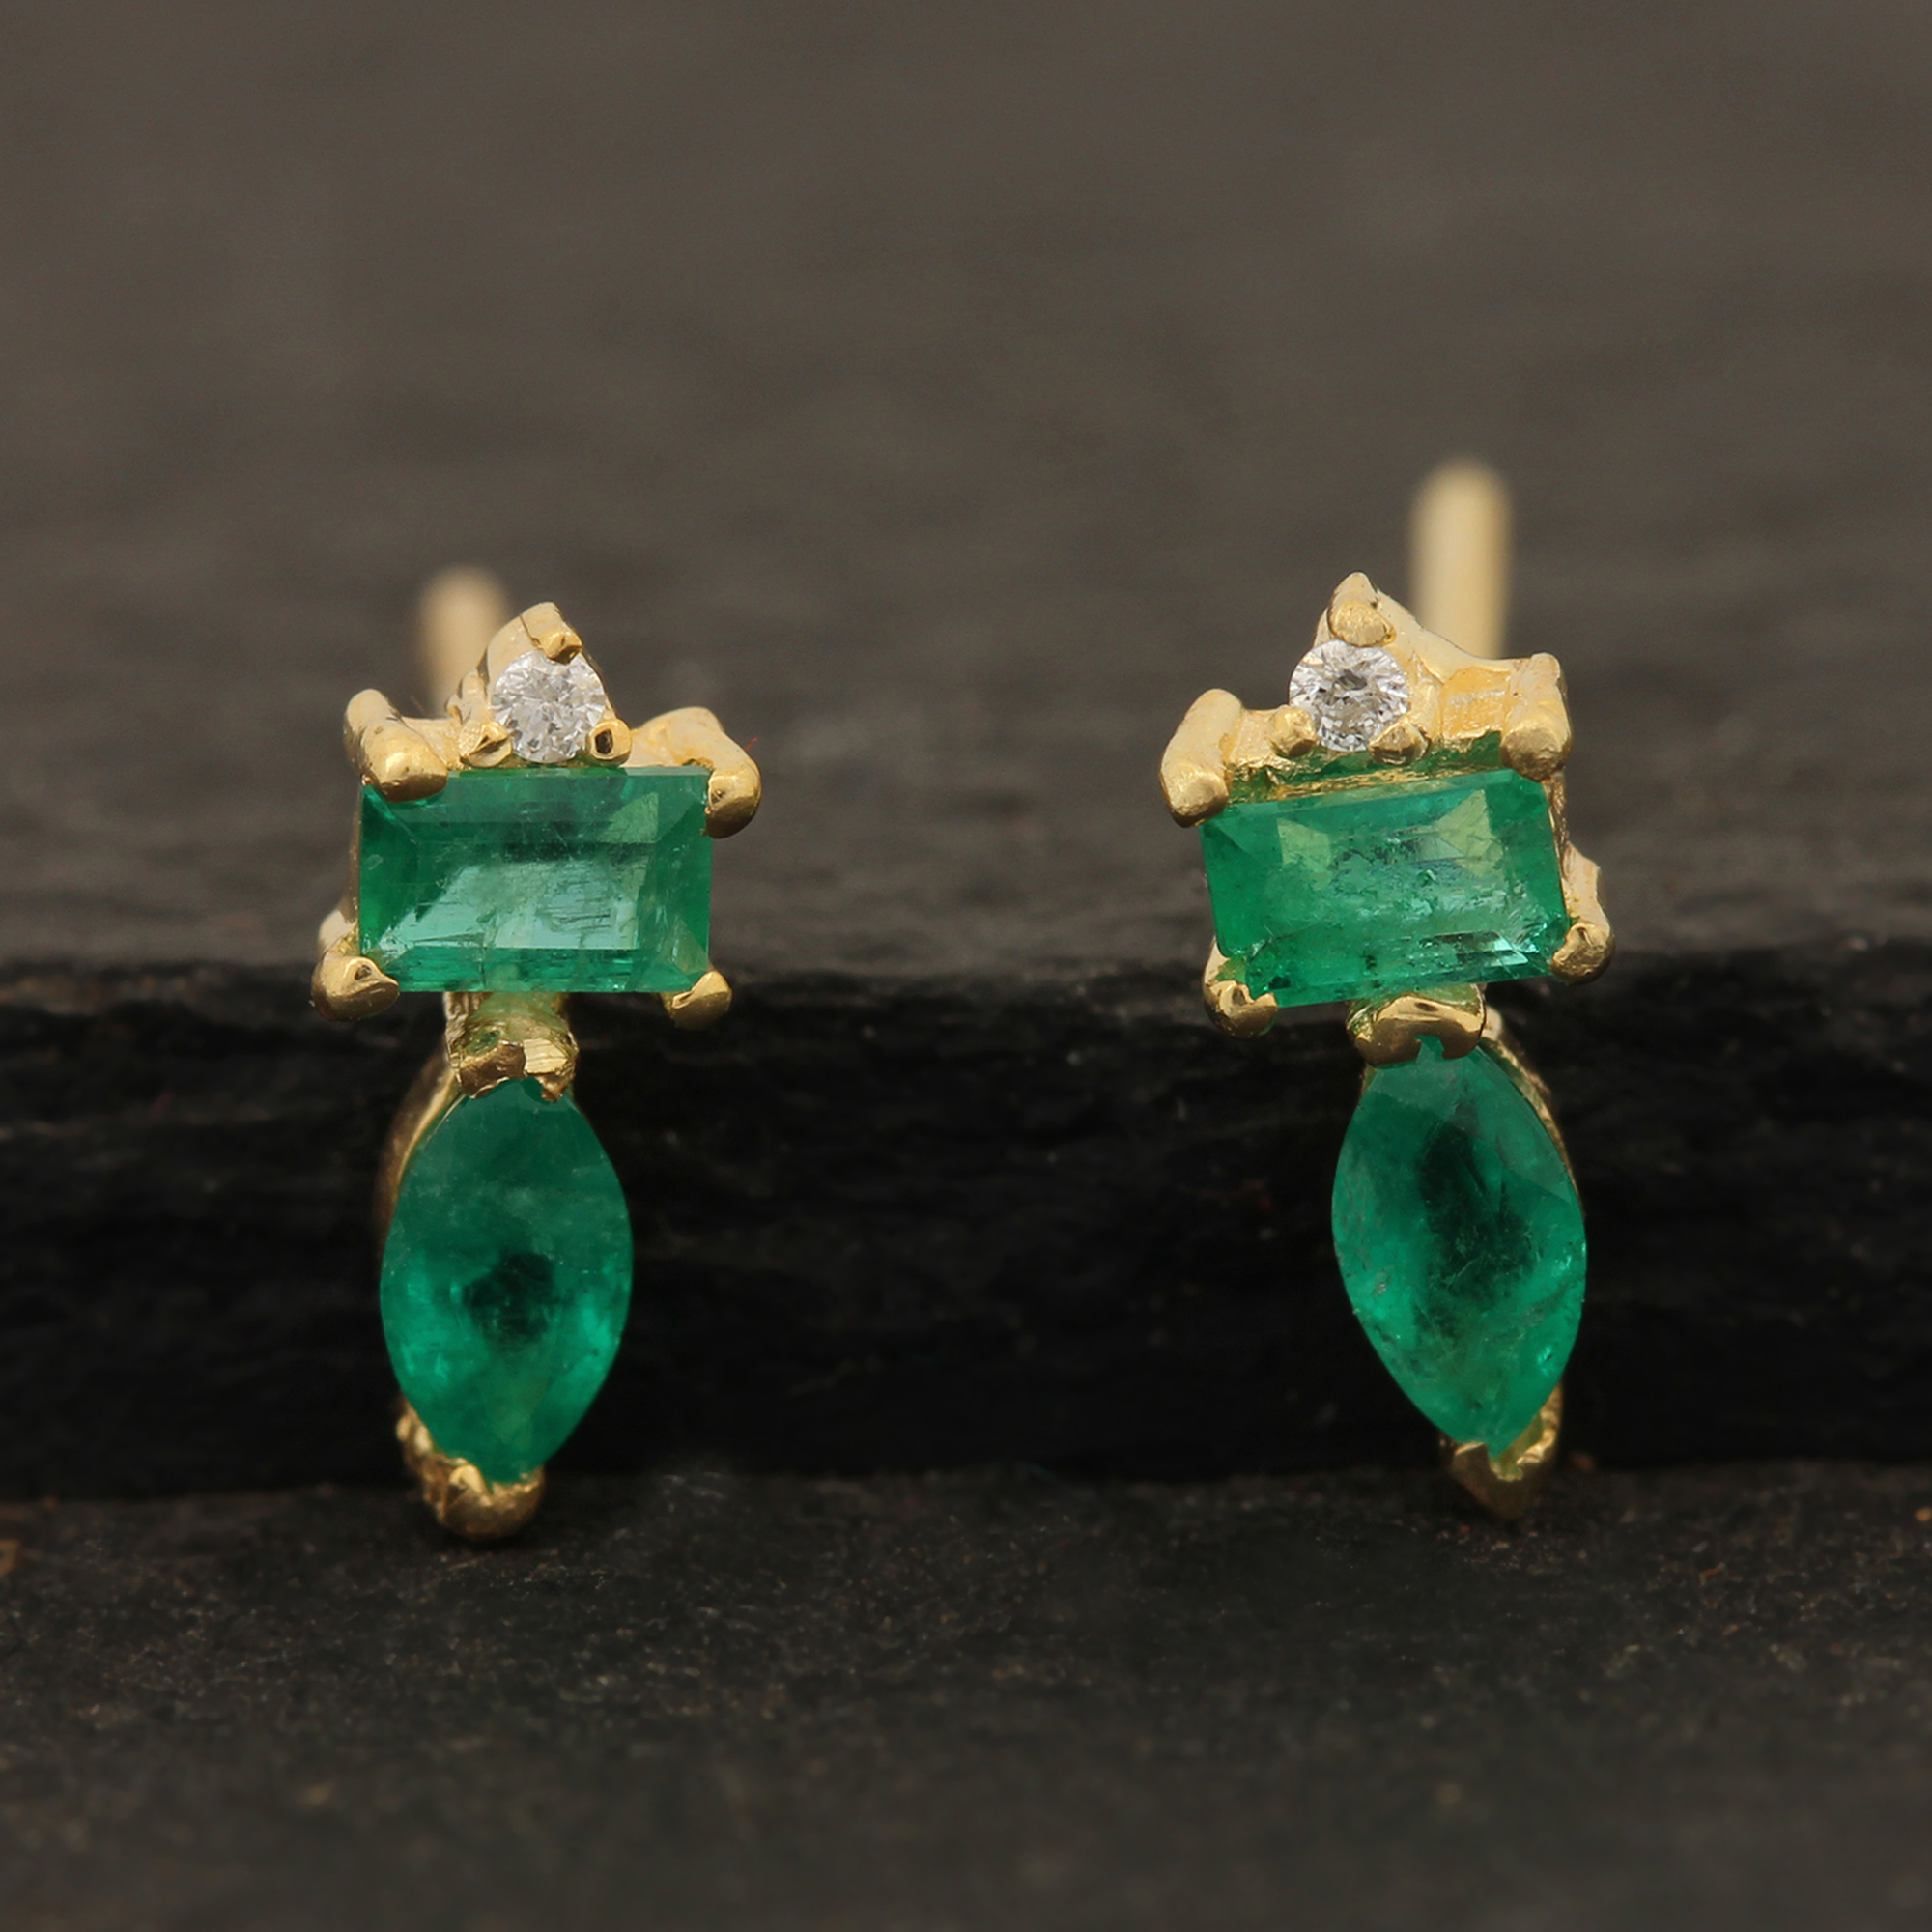 14k Gold Solitaire Stud Earrings Adorned With Natural Diamond & Emerald